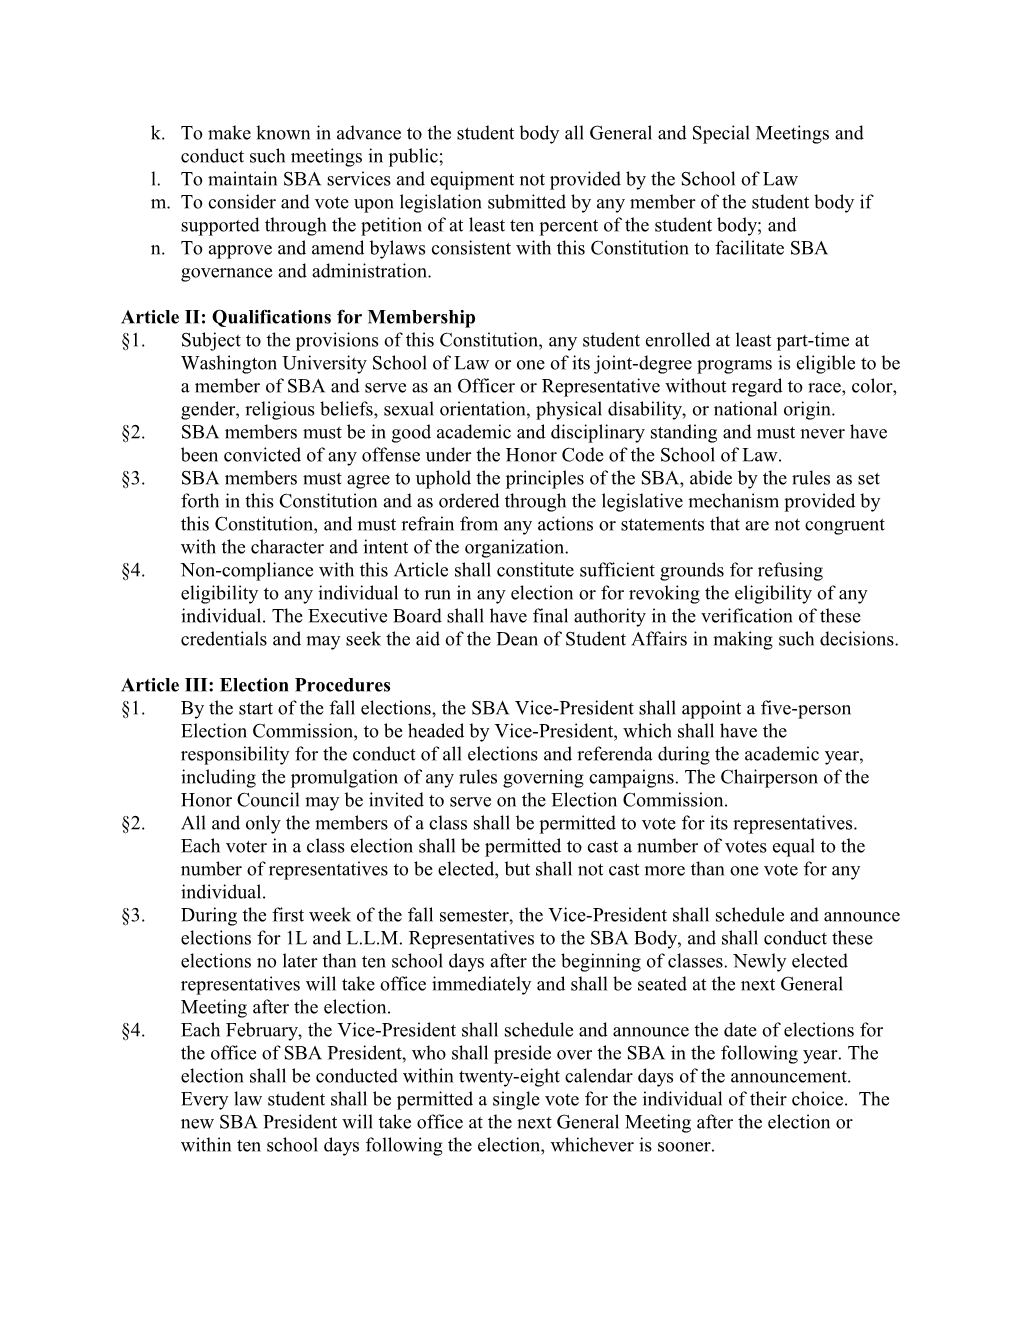 Constitution of the Student Bar Association